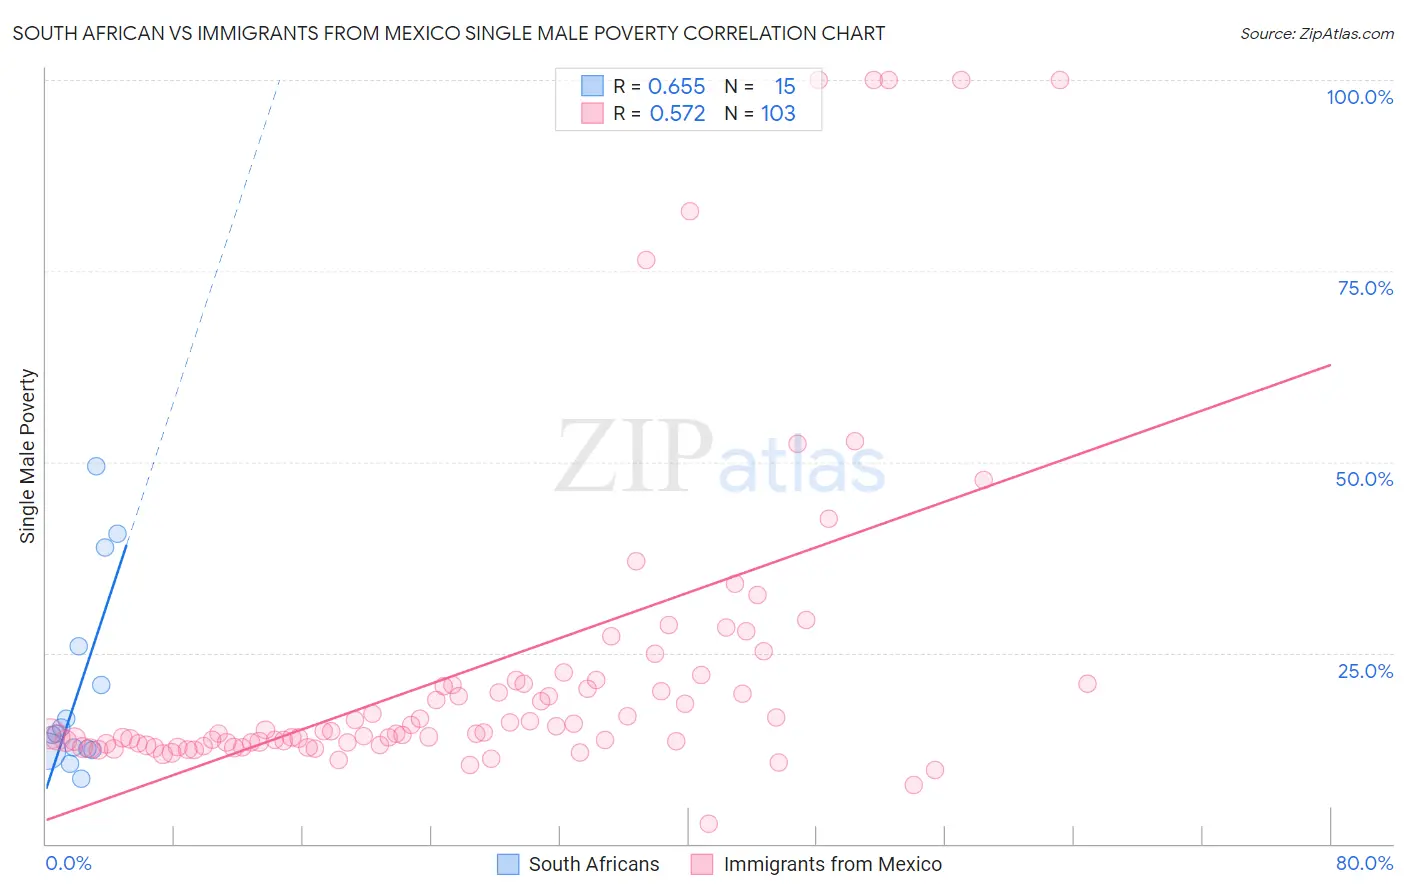 South African vs Immigrants from Mexico Single Male Poverty